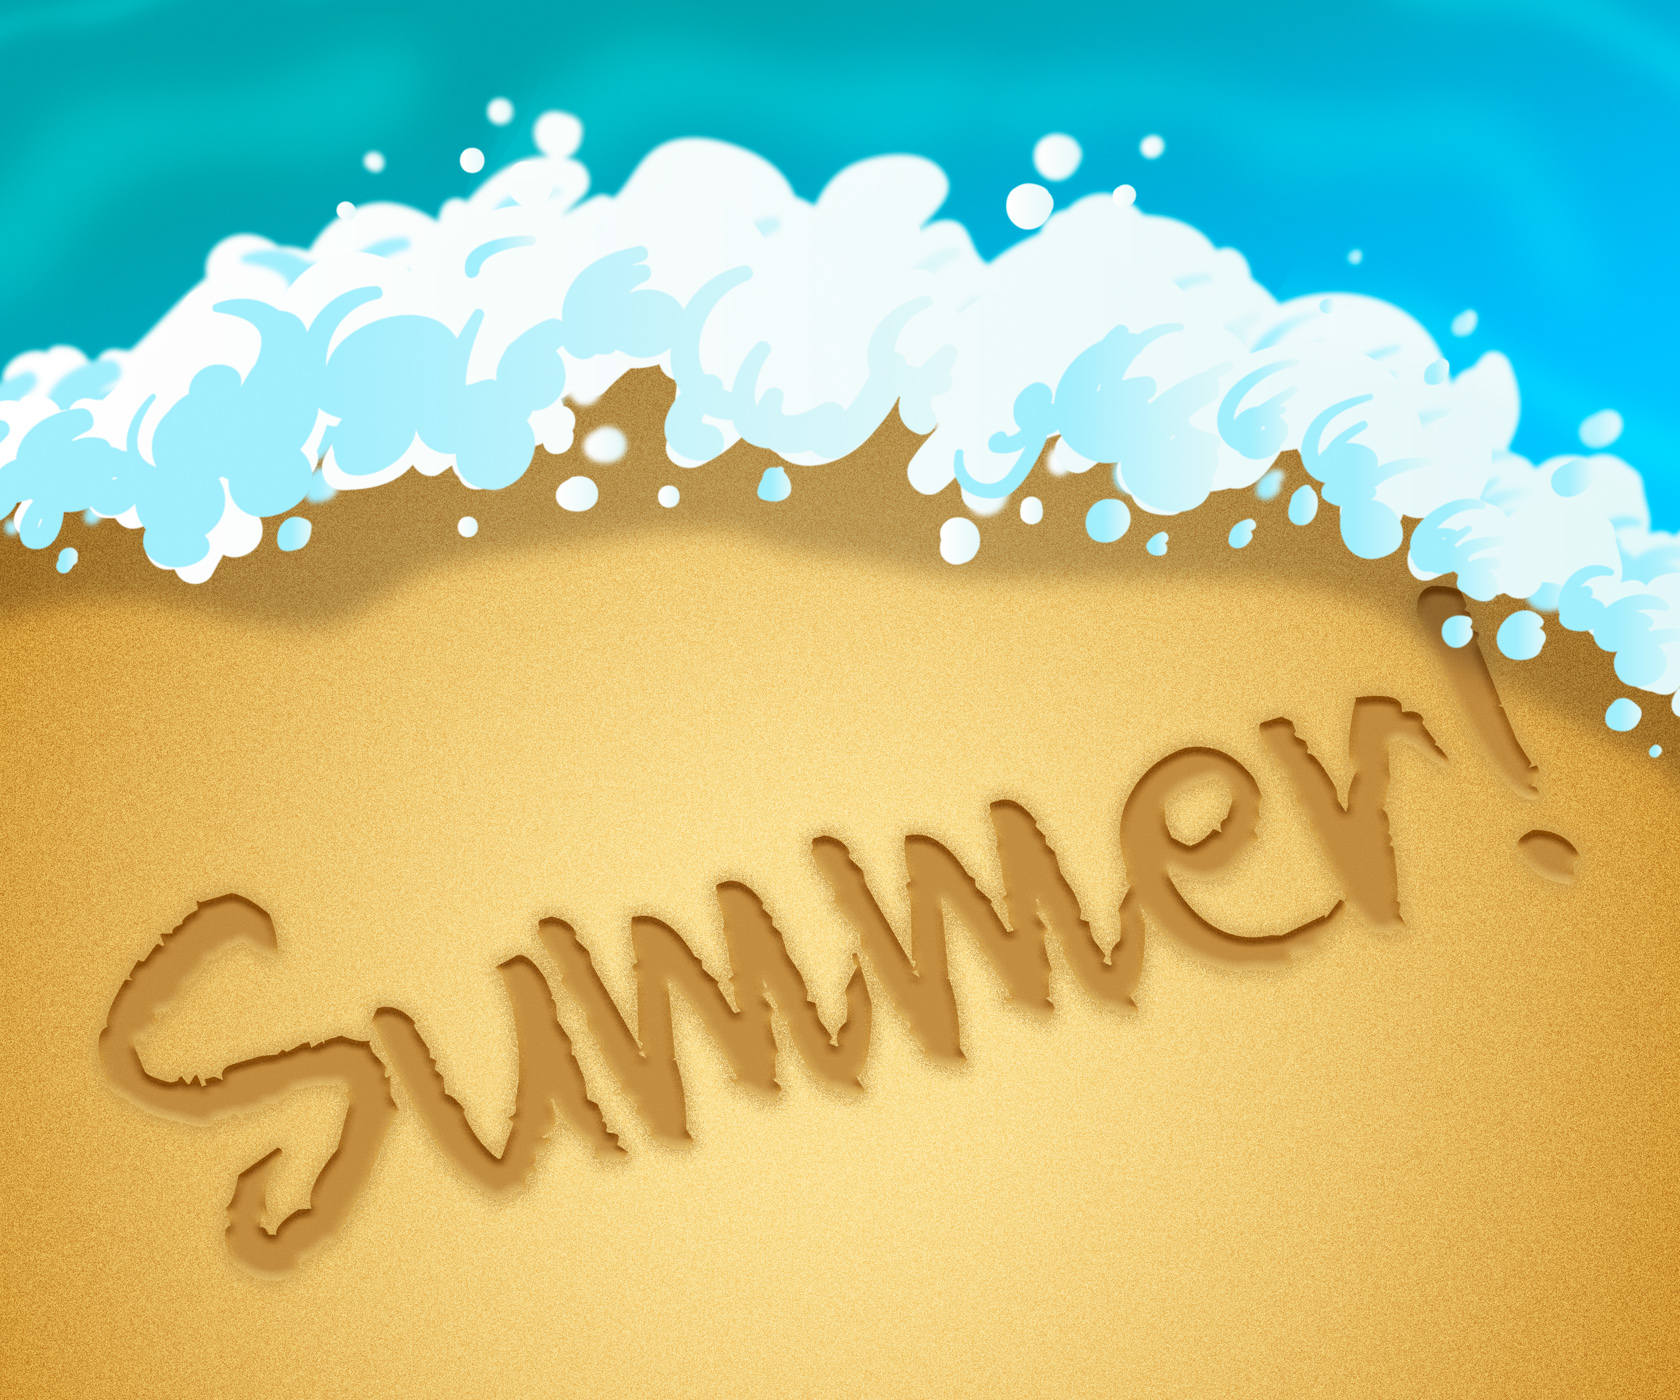 Summer beach means summertime vacation 3d illustration photo